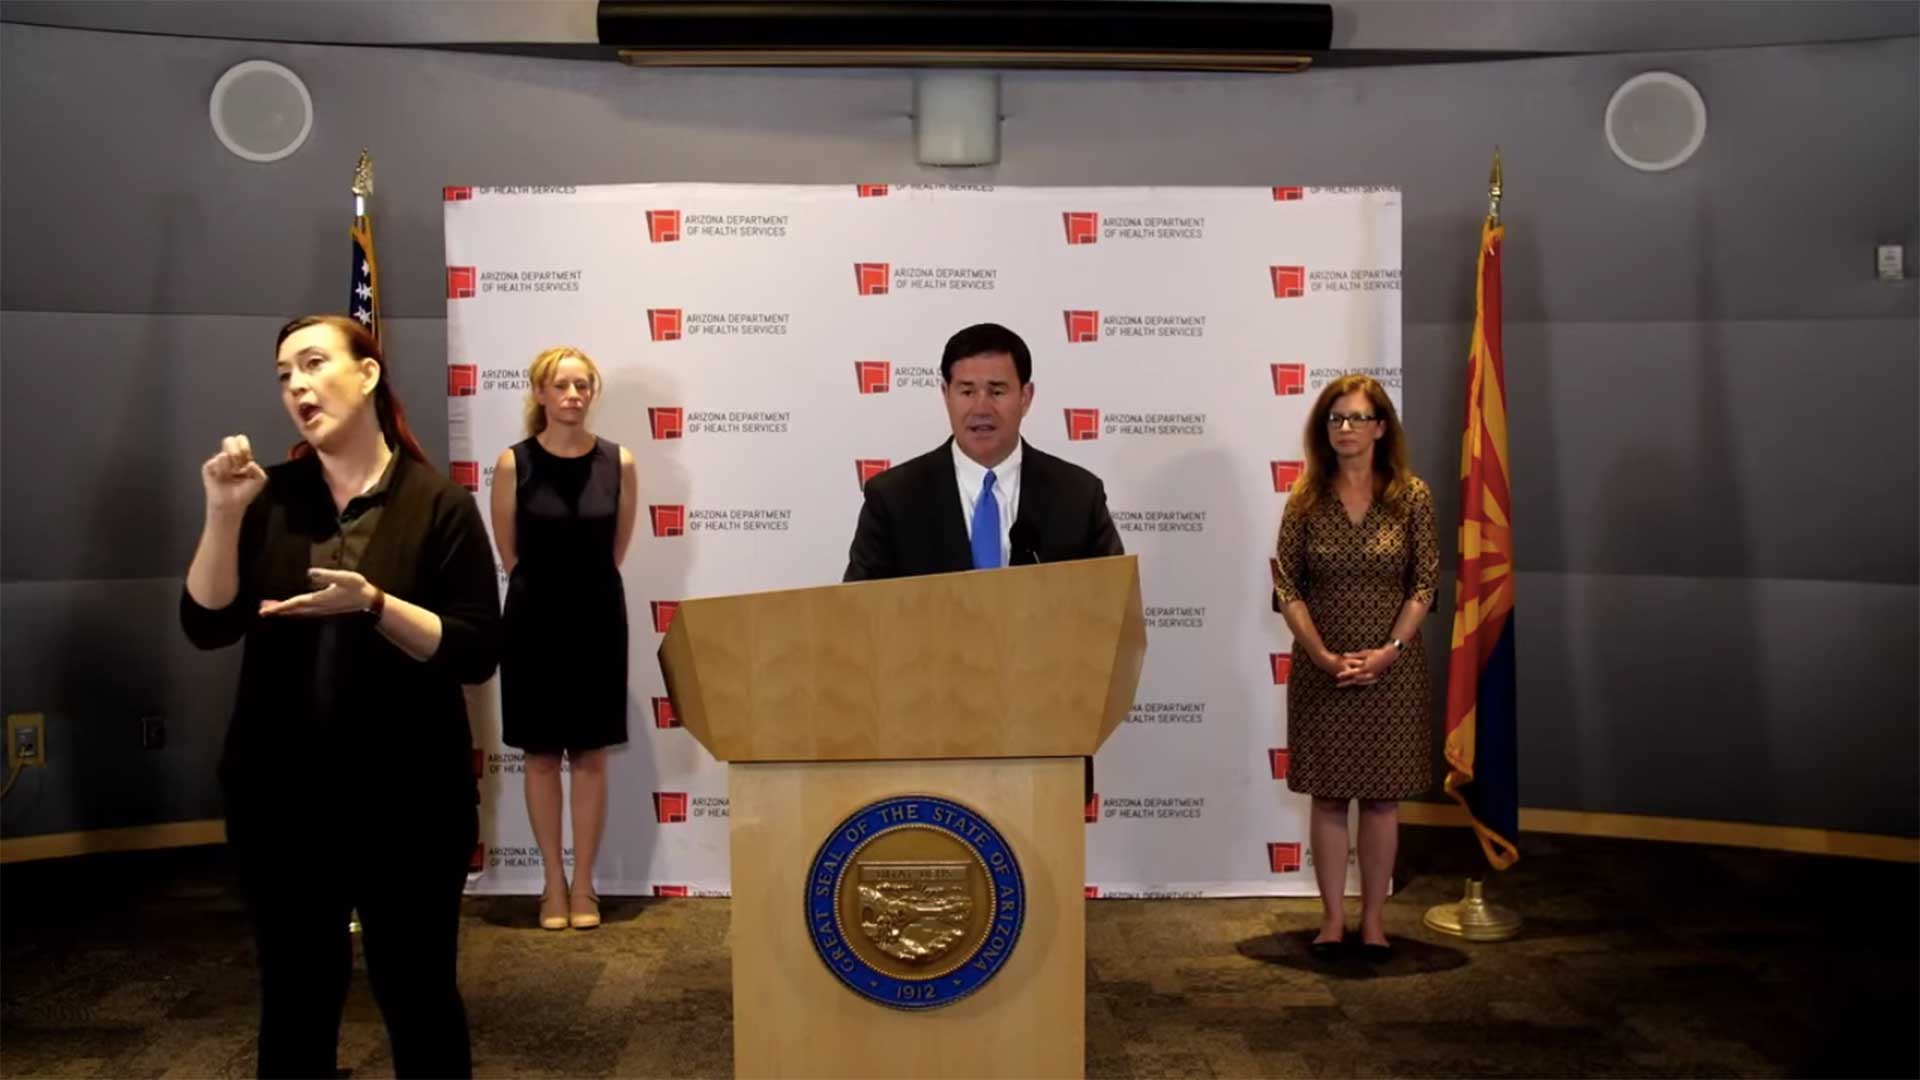 Arizona Gov. Doug Ducey speaks in a March 23 update about the state's COVID-19 response.